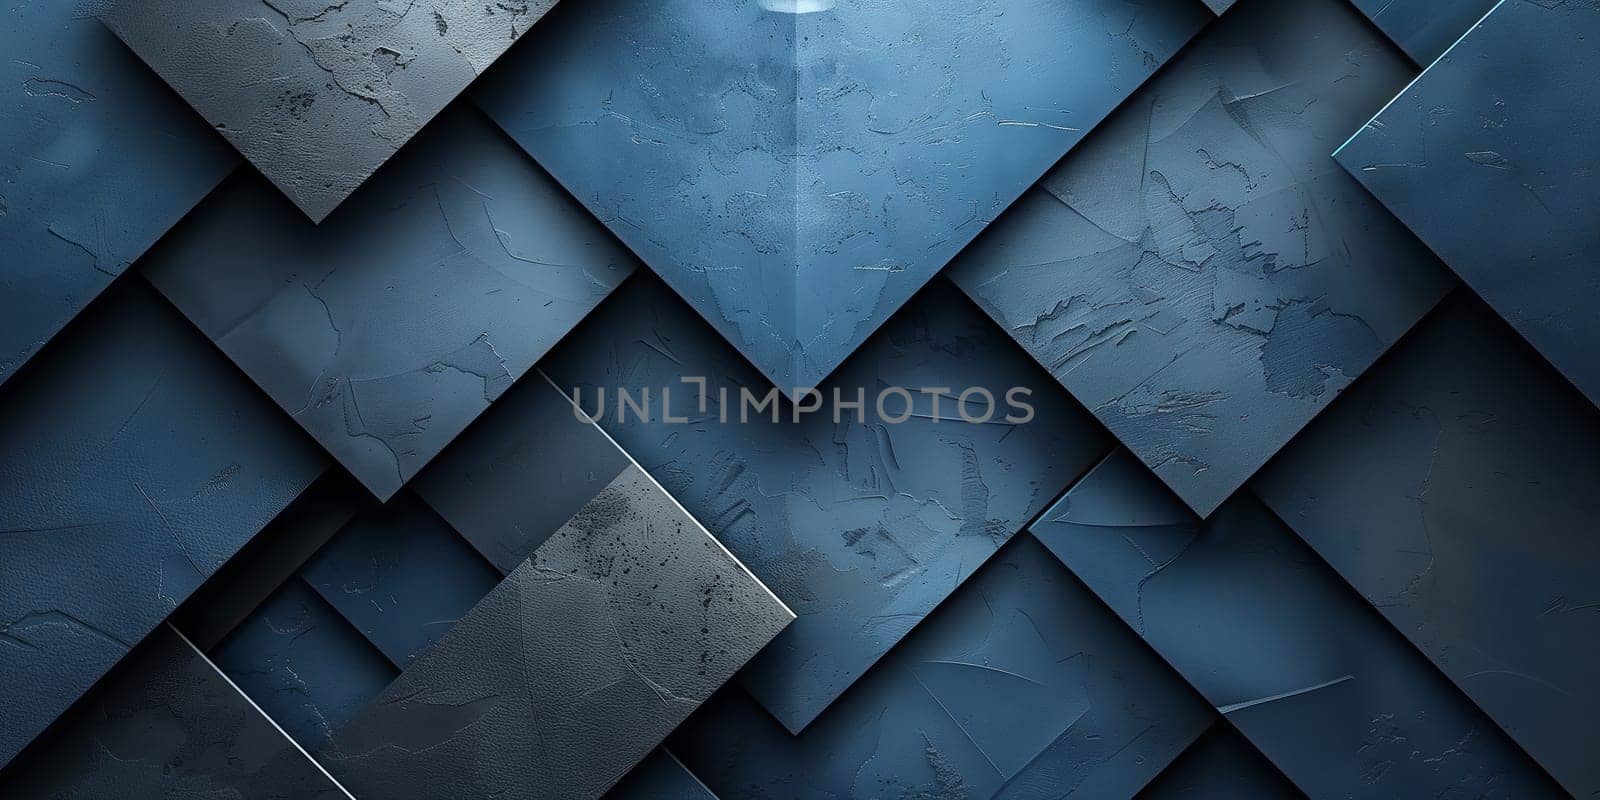 A close up of a geometric pattern in shades of electric blue on a grey wall, featuring triangular symmetry. The pattern resembles wood flooring with hints of metal accents